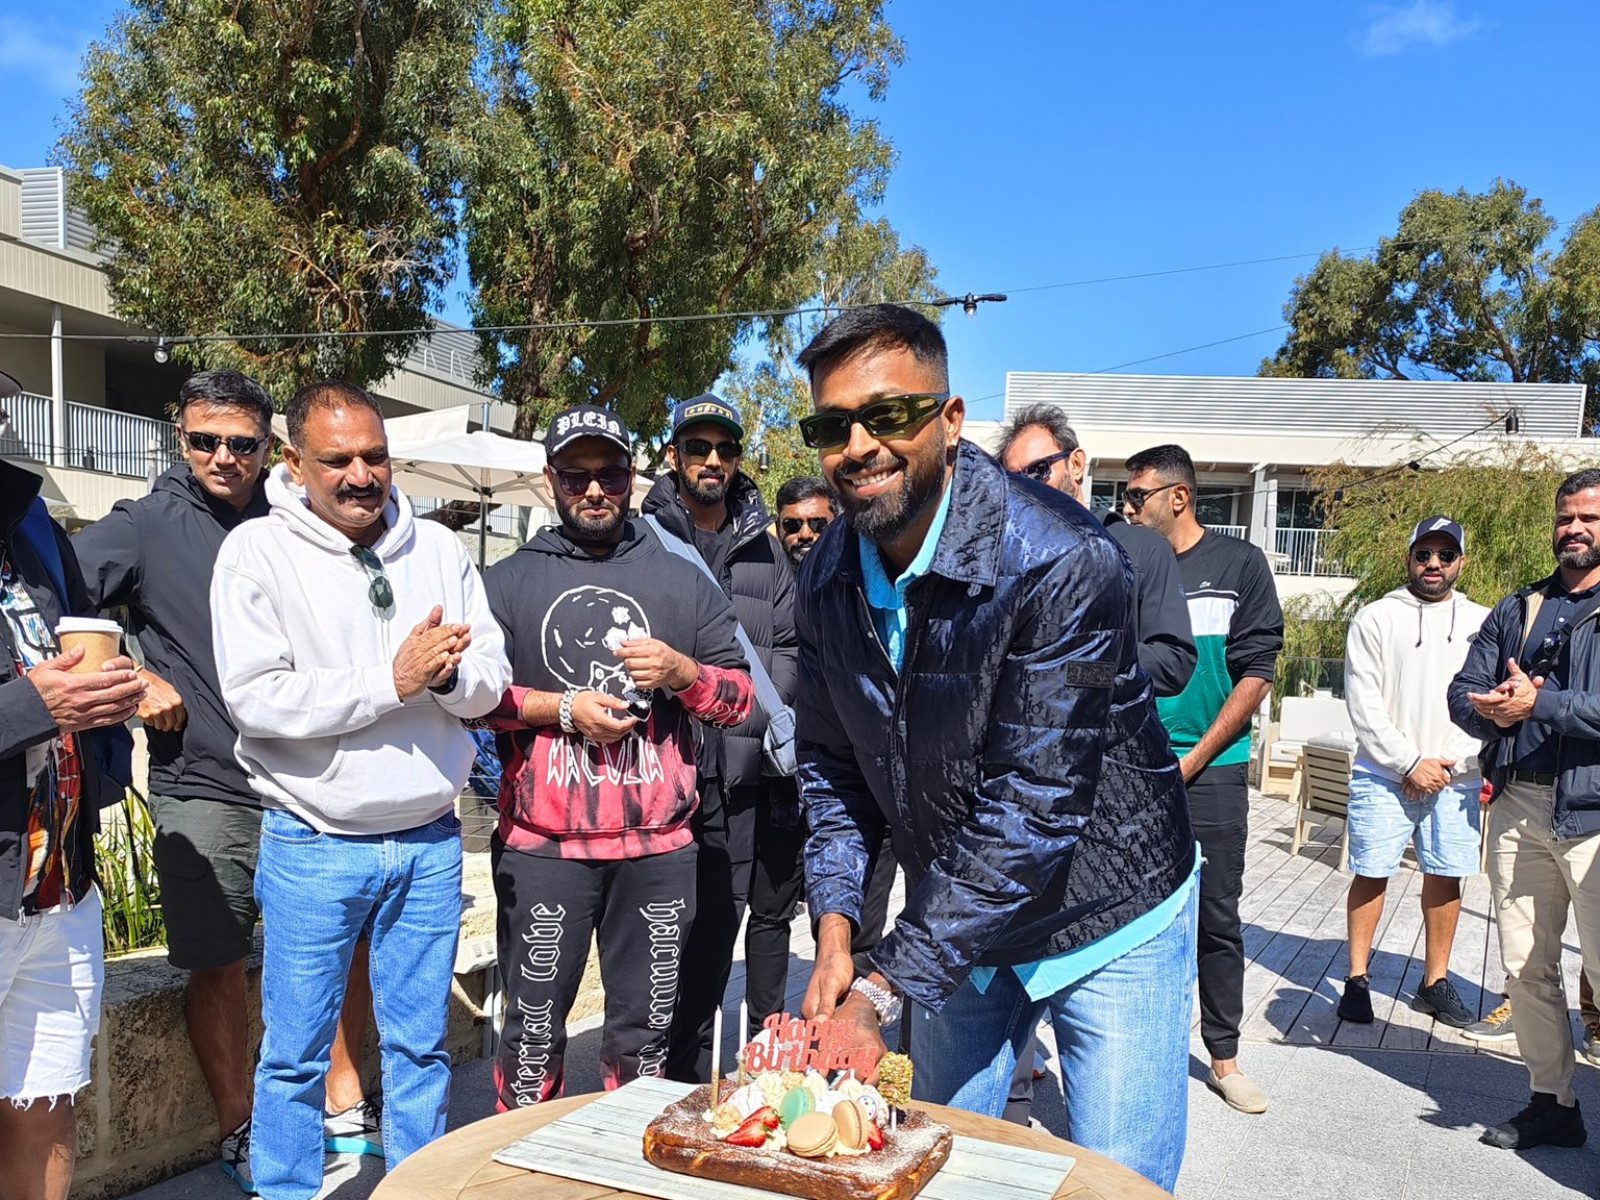 Watch: Team mates bring birthday cake for Kohli, what happens next will  leave you in splits